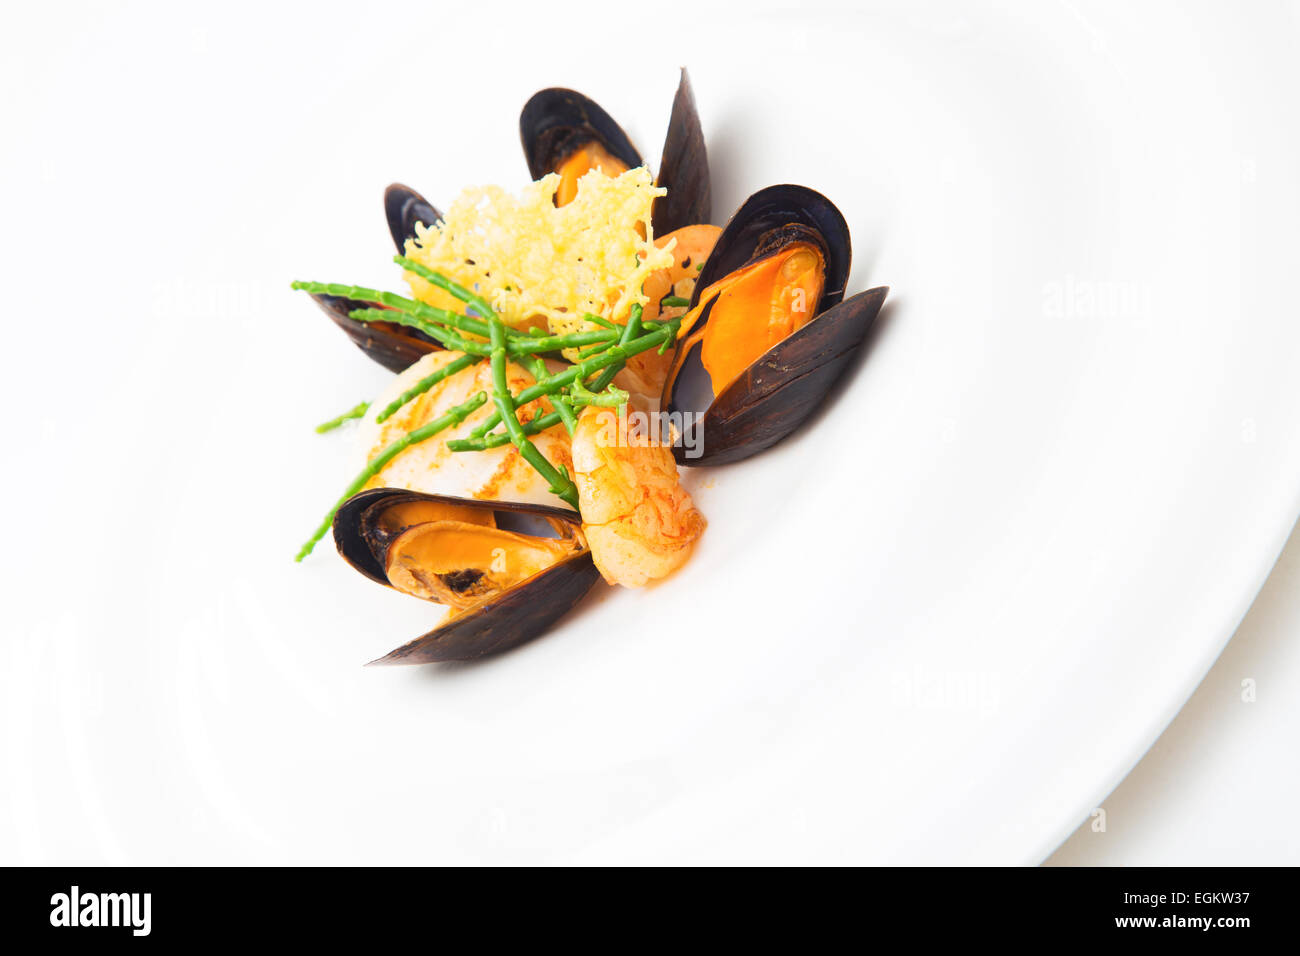 Mollusc and mussels appetizer prepared at a restaurant, isolated on white, vertical format Stock Photo